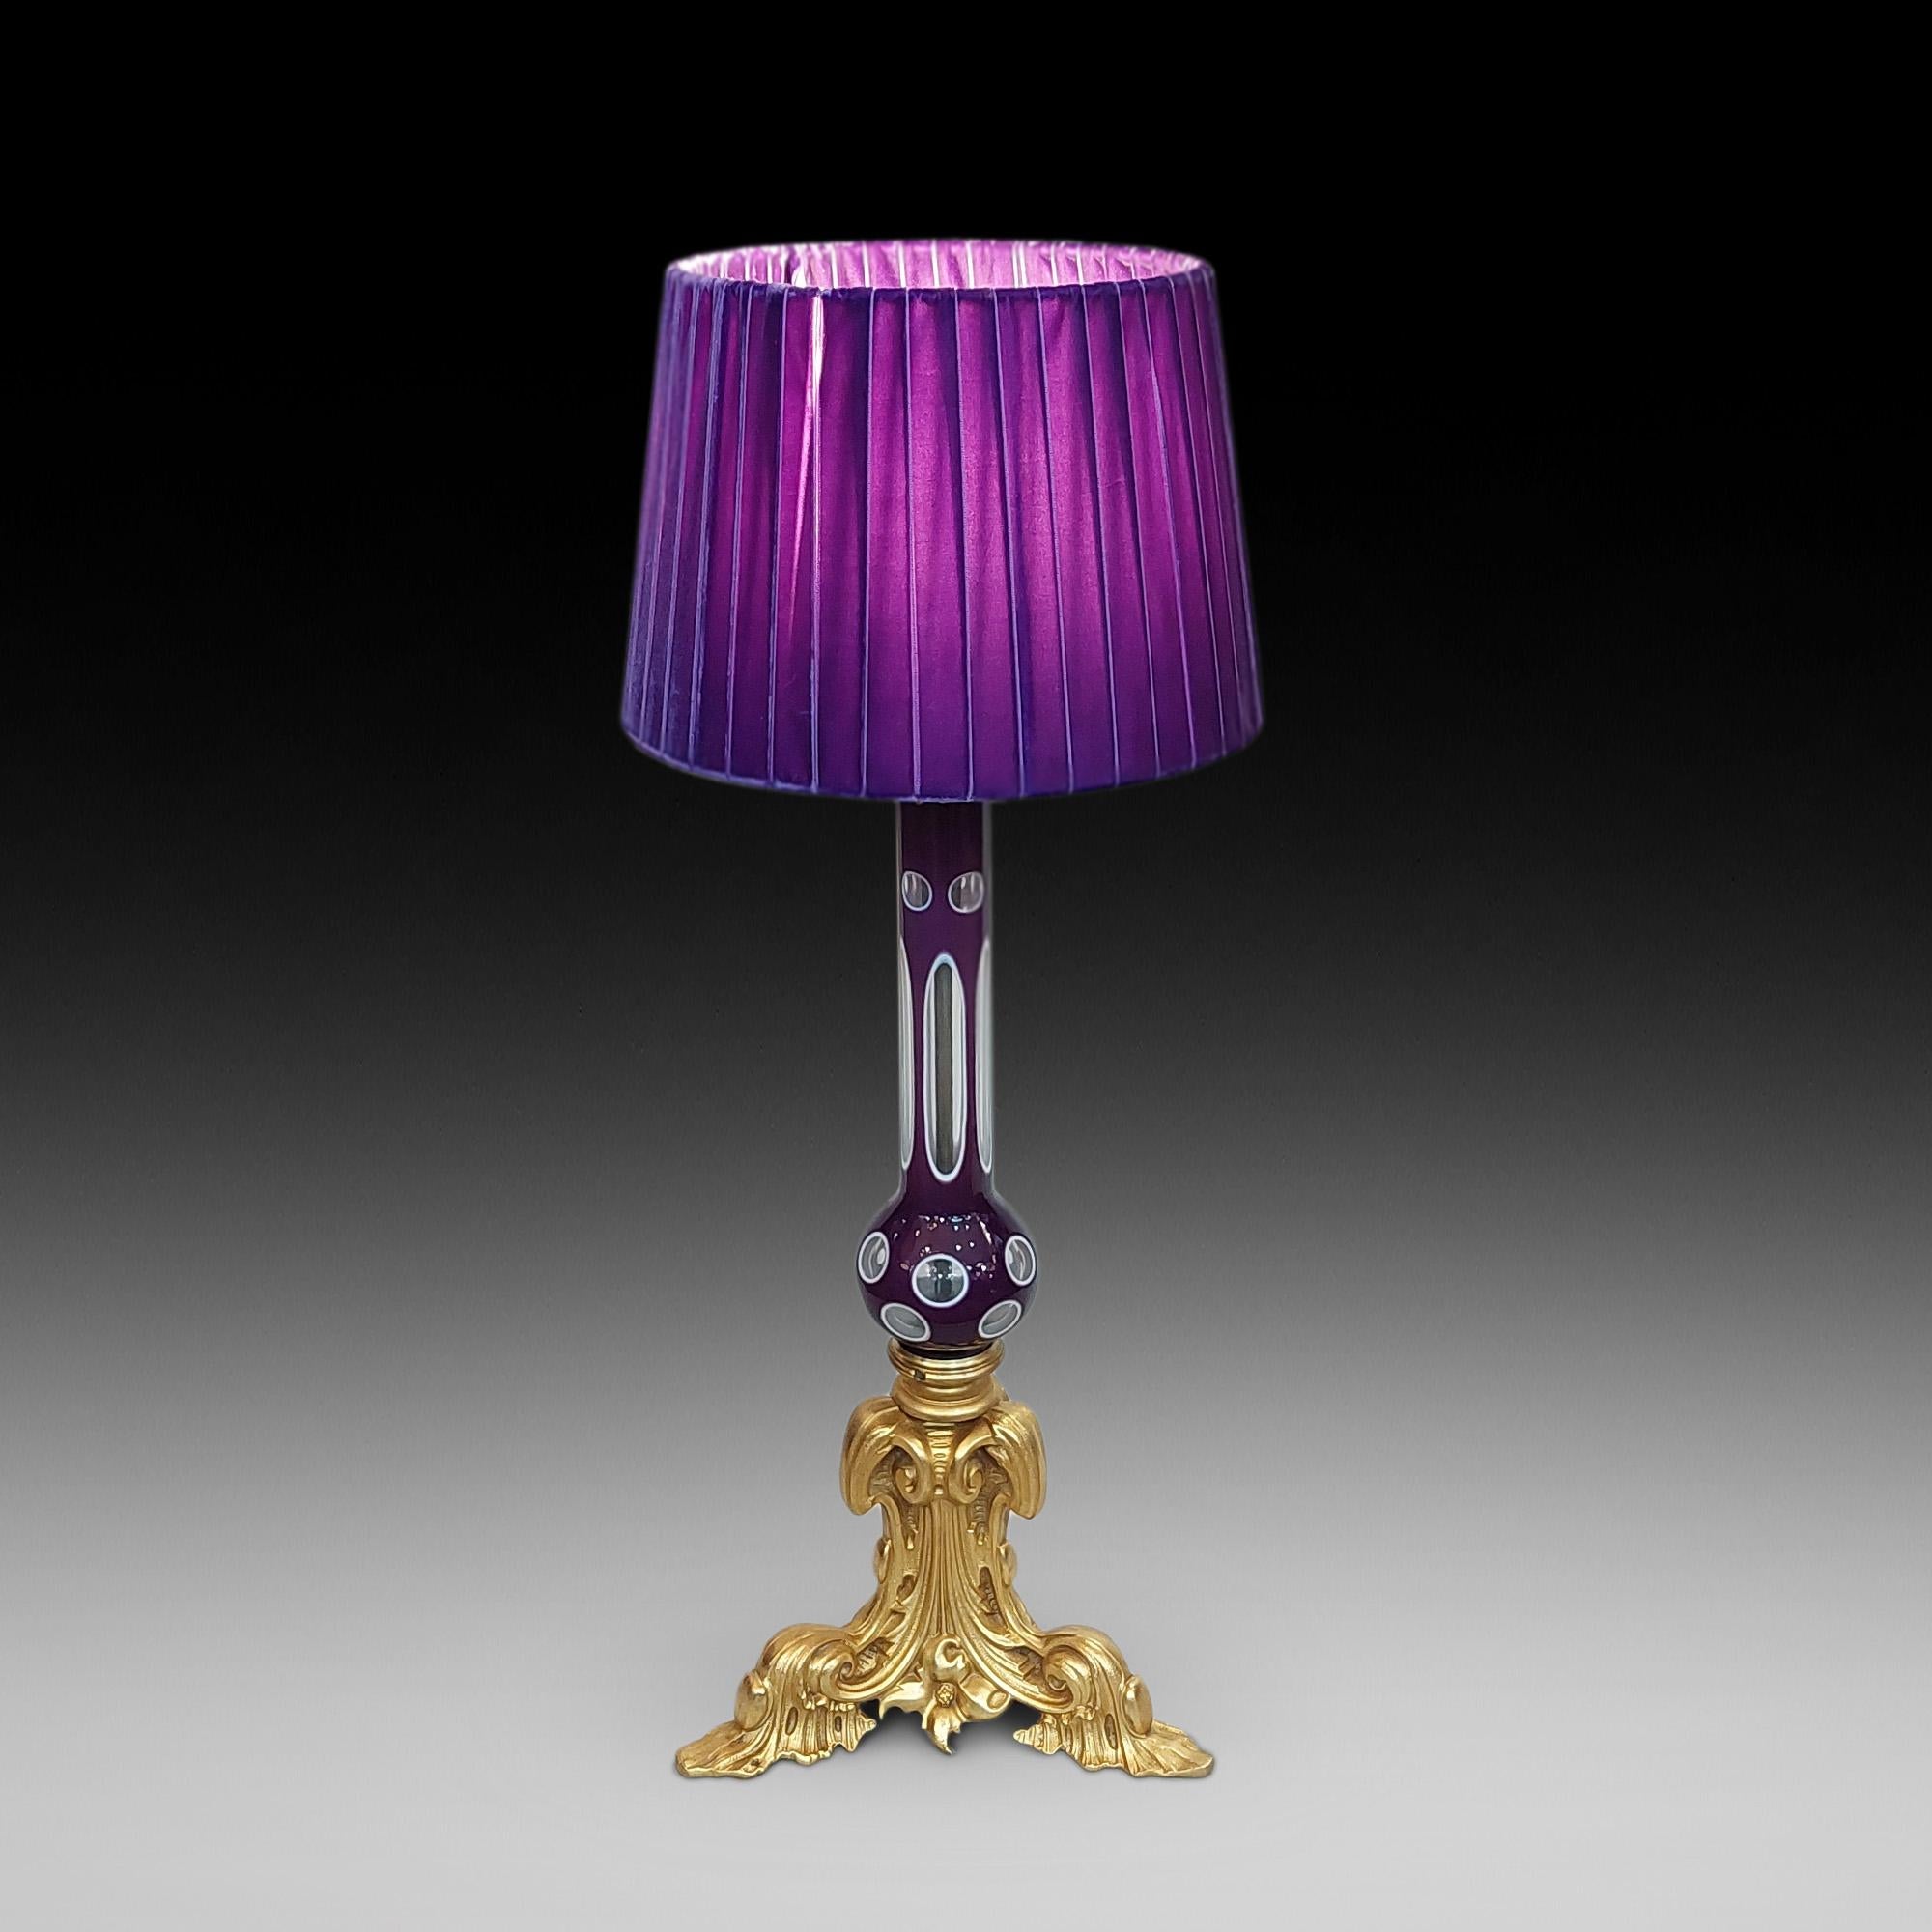 Early 20thC Gilt Bronze and Murano Glass Table Lamp with Scrolled Acanthus Tri-Form Base - 9